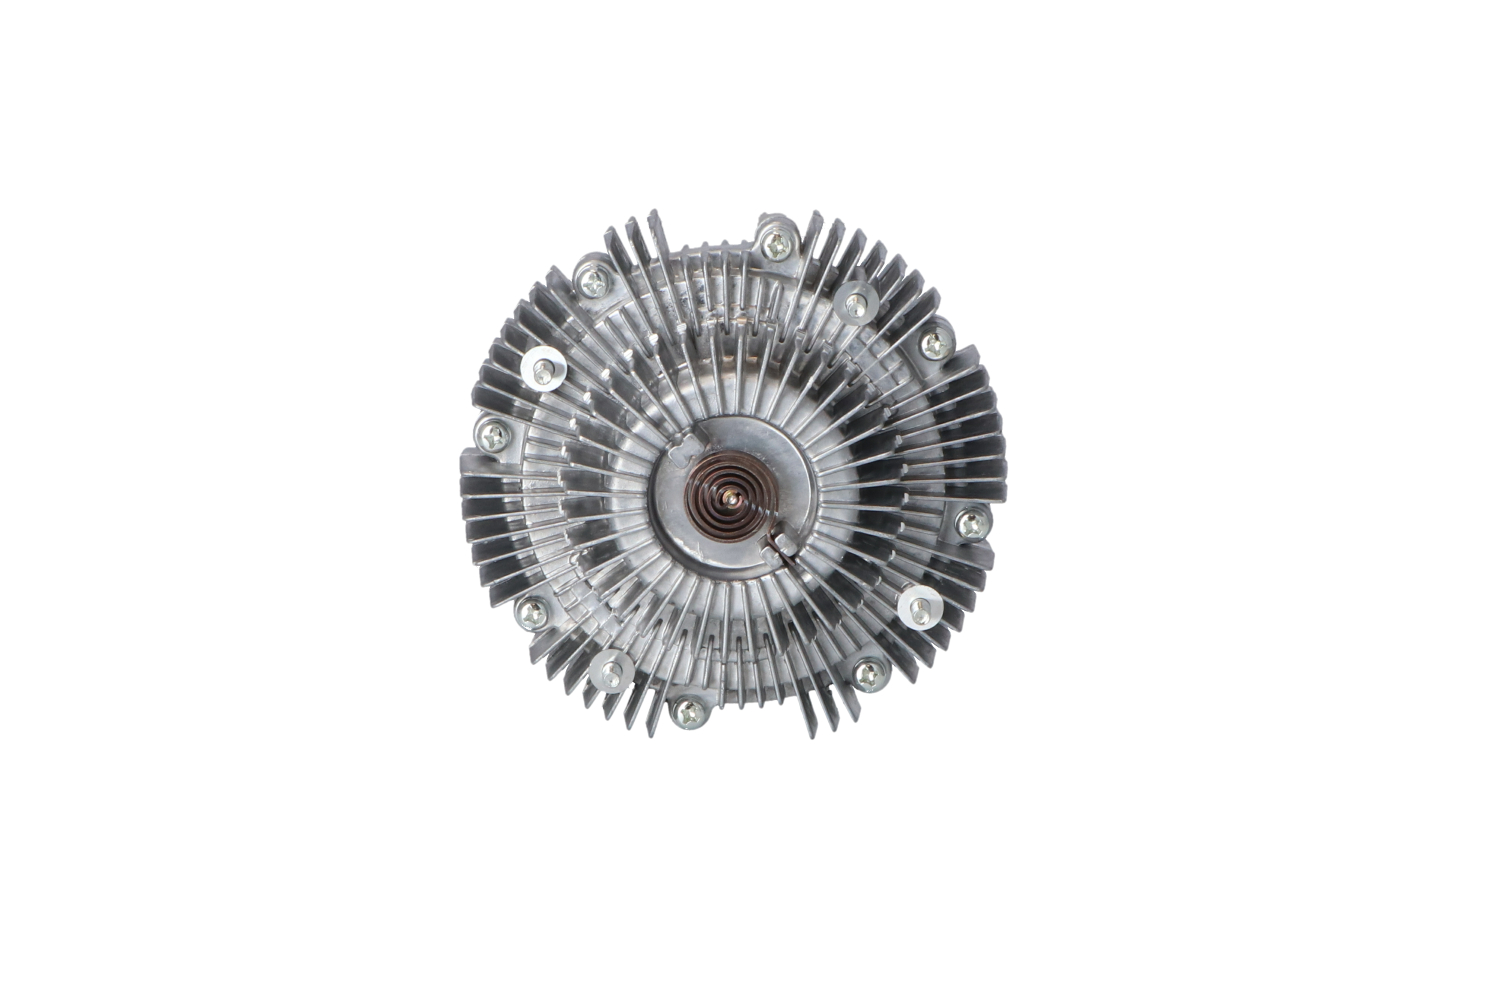 Original 49585 NRF Fan clutch experience and price